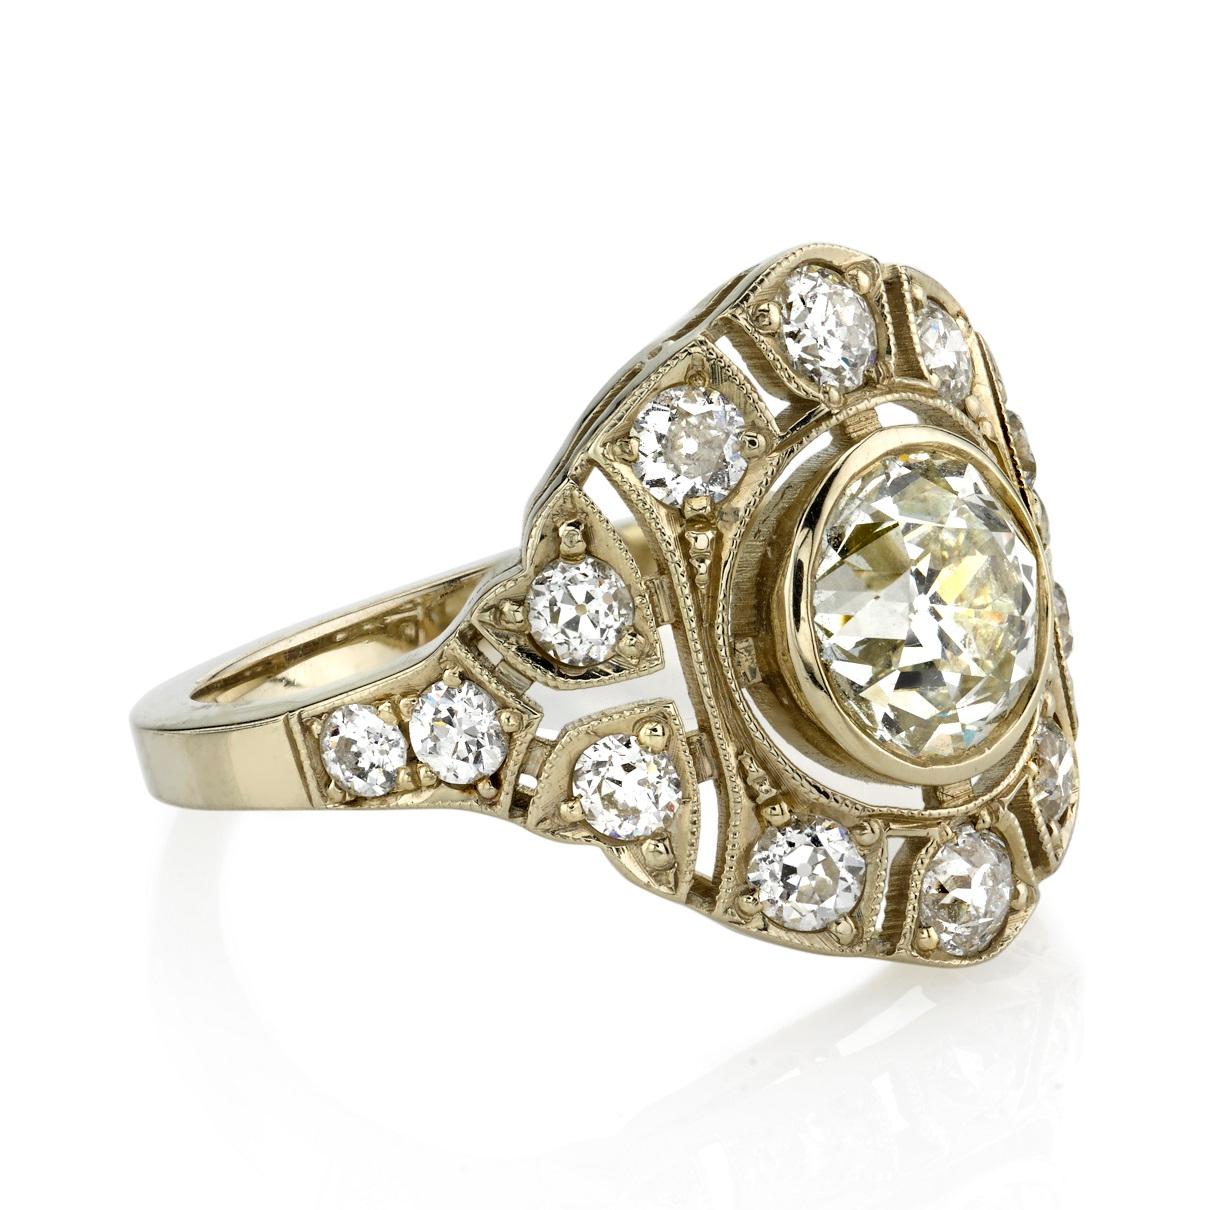 1.17ct K/VS1 EGL certified old Mine cut diamond with 0.82ctw diamond accents set in a handcrafted 18k champagne gold mounting. Ring is currently a size 6 and can be sized to fit. 